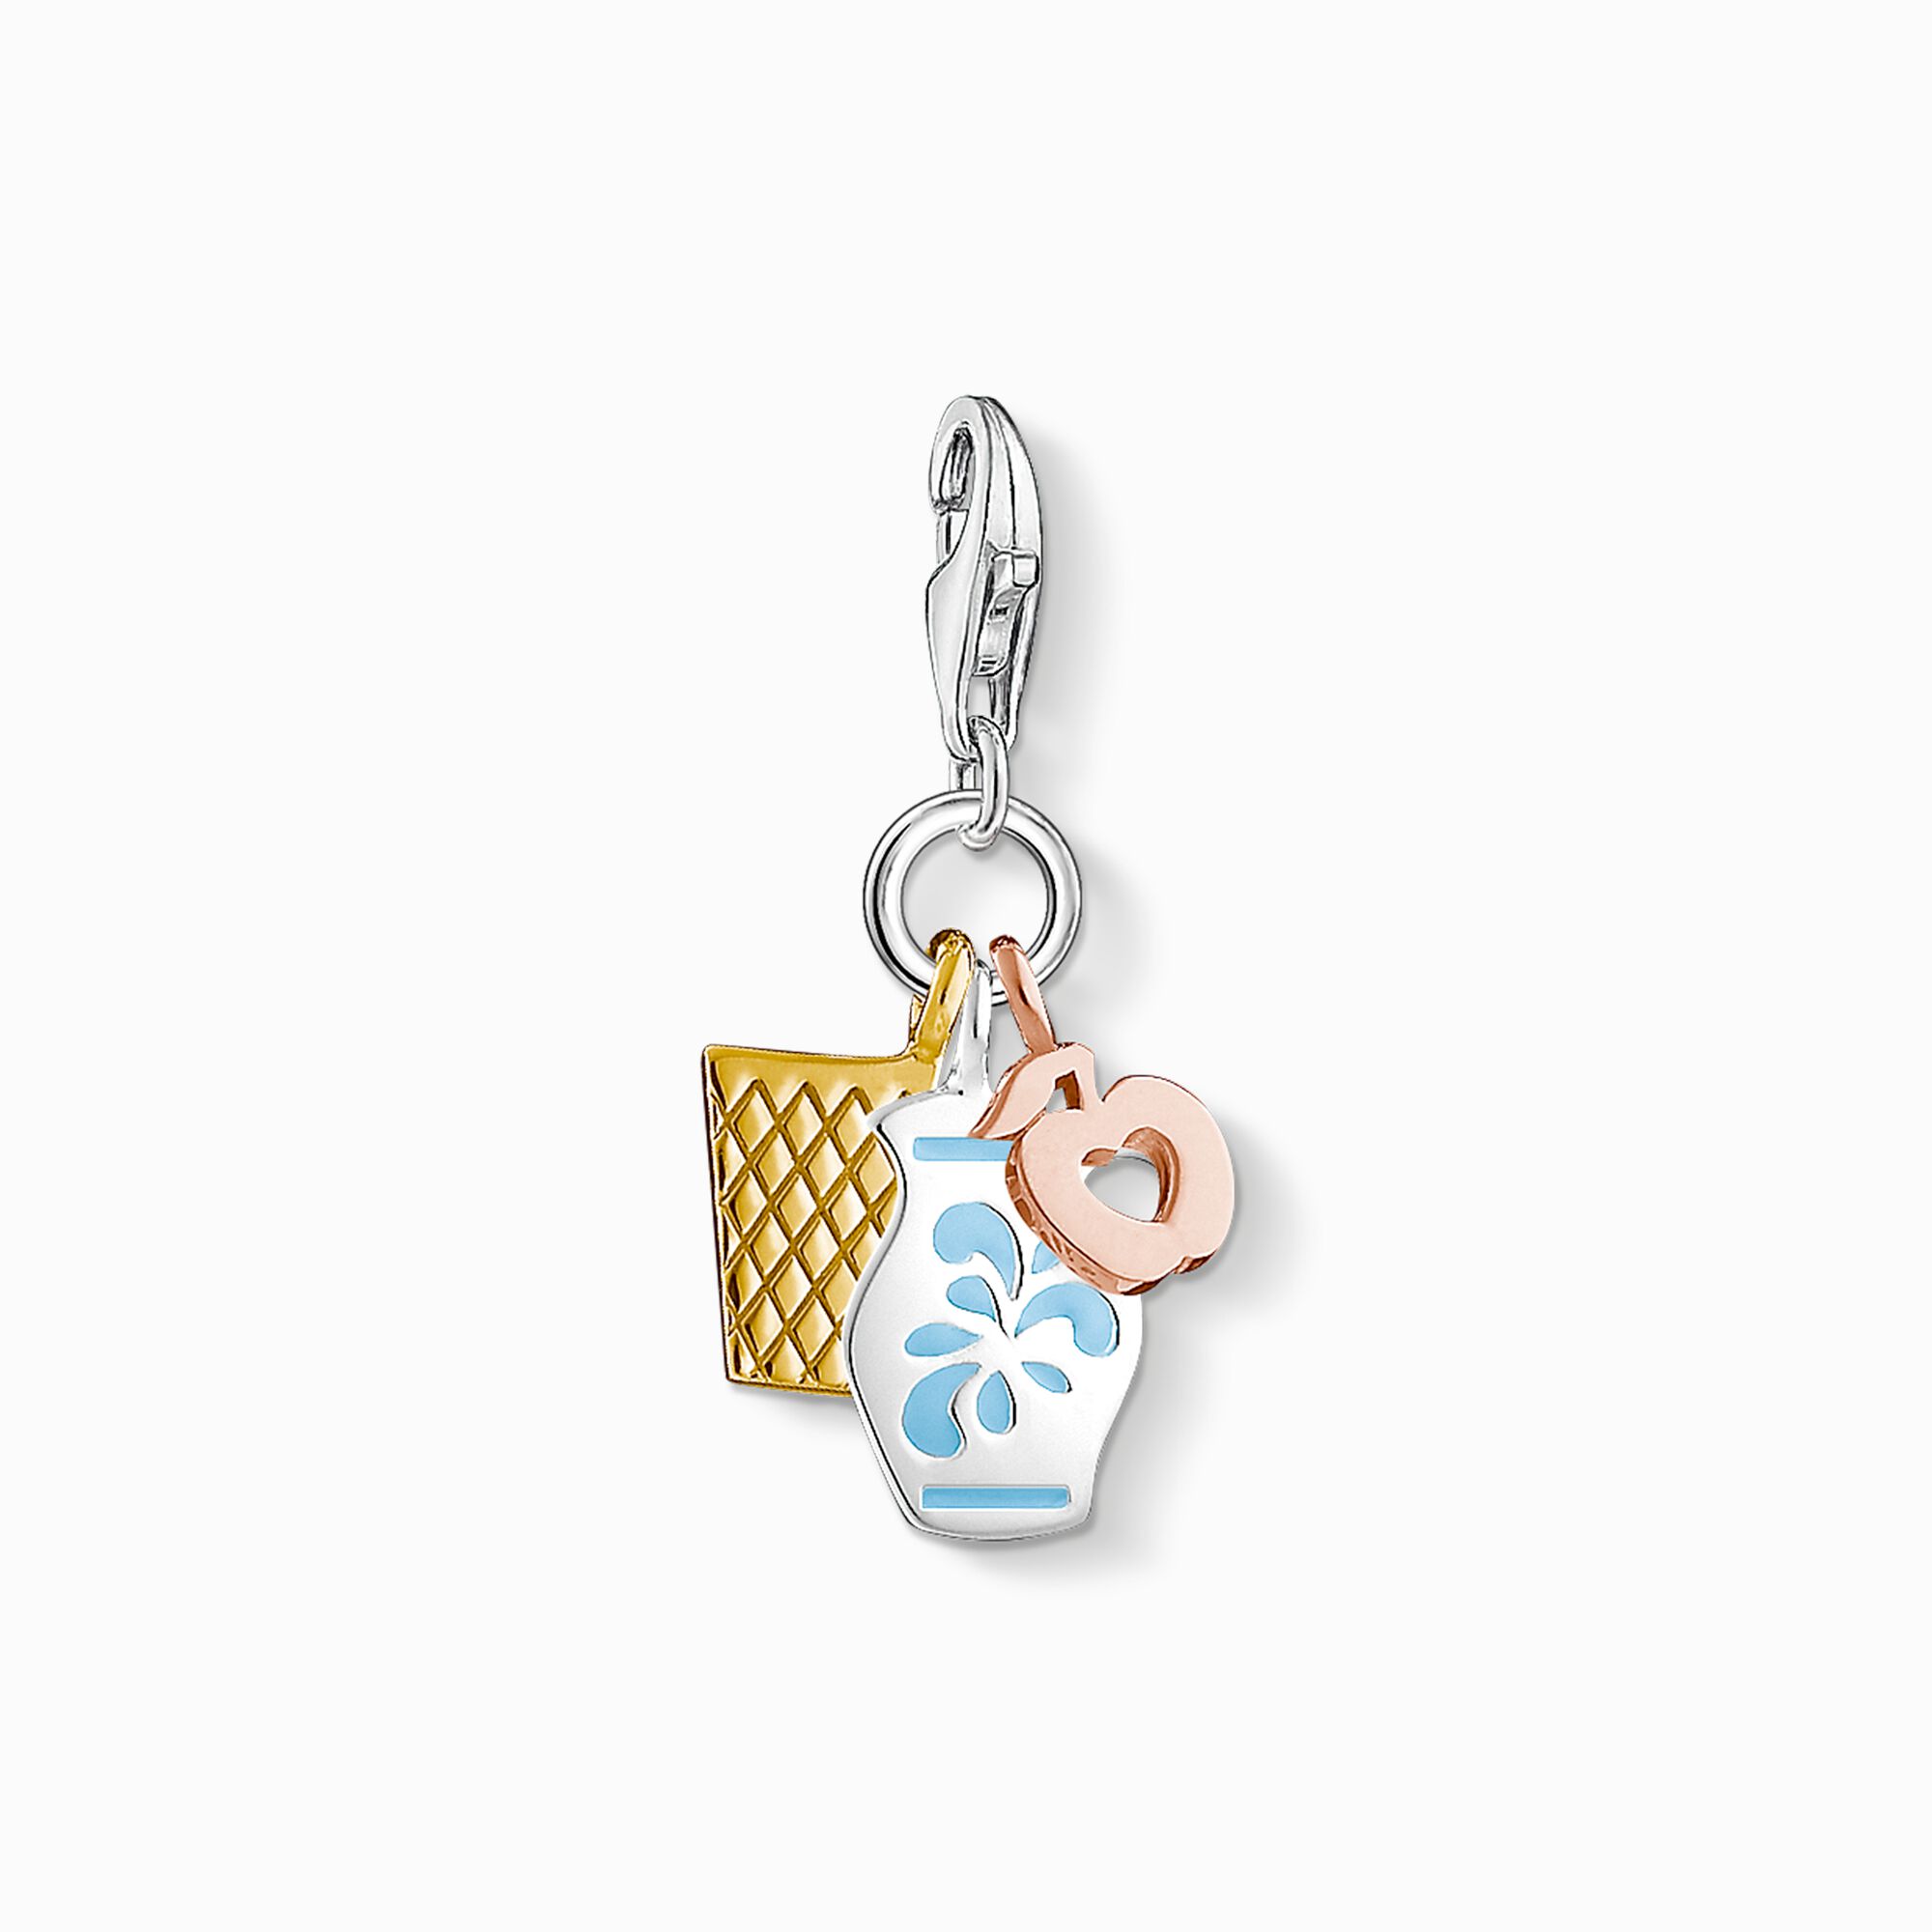 Charm pendant Frankfurt jug from the Charm Club collection in the THOMAS SABO online store